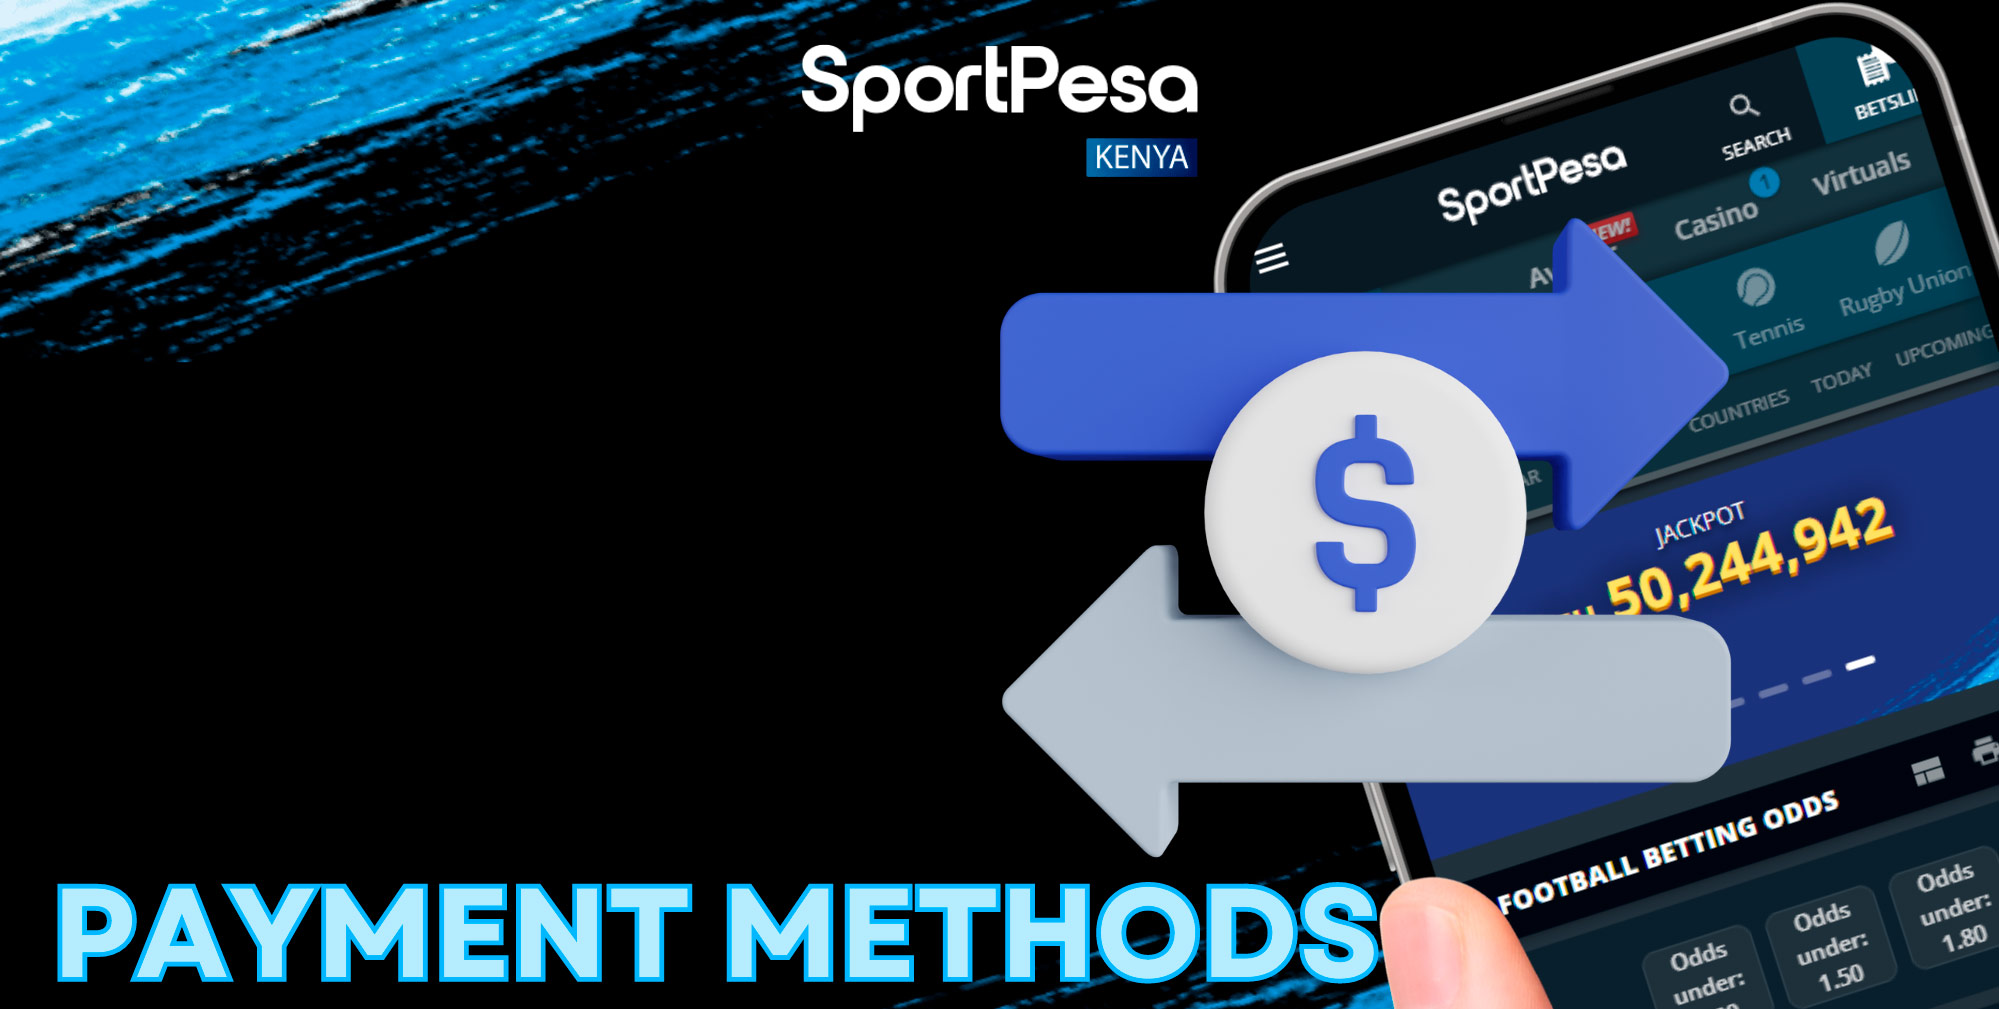 Depositing and withdrawing funds in the Sportpesa